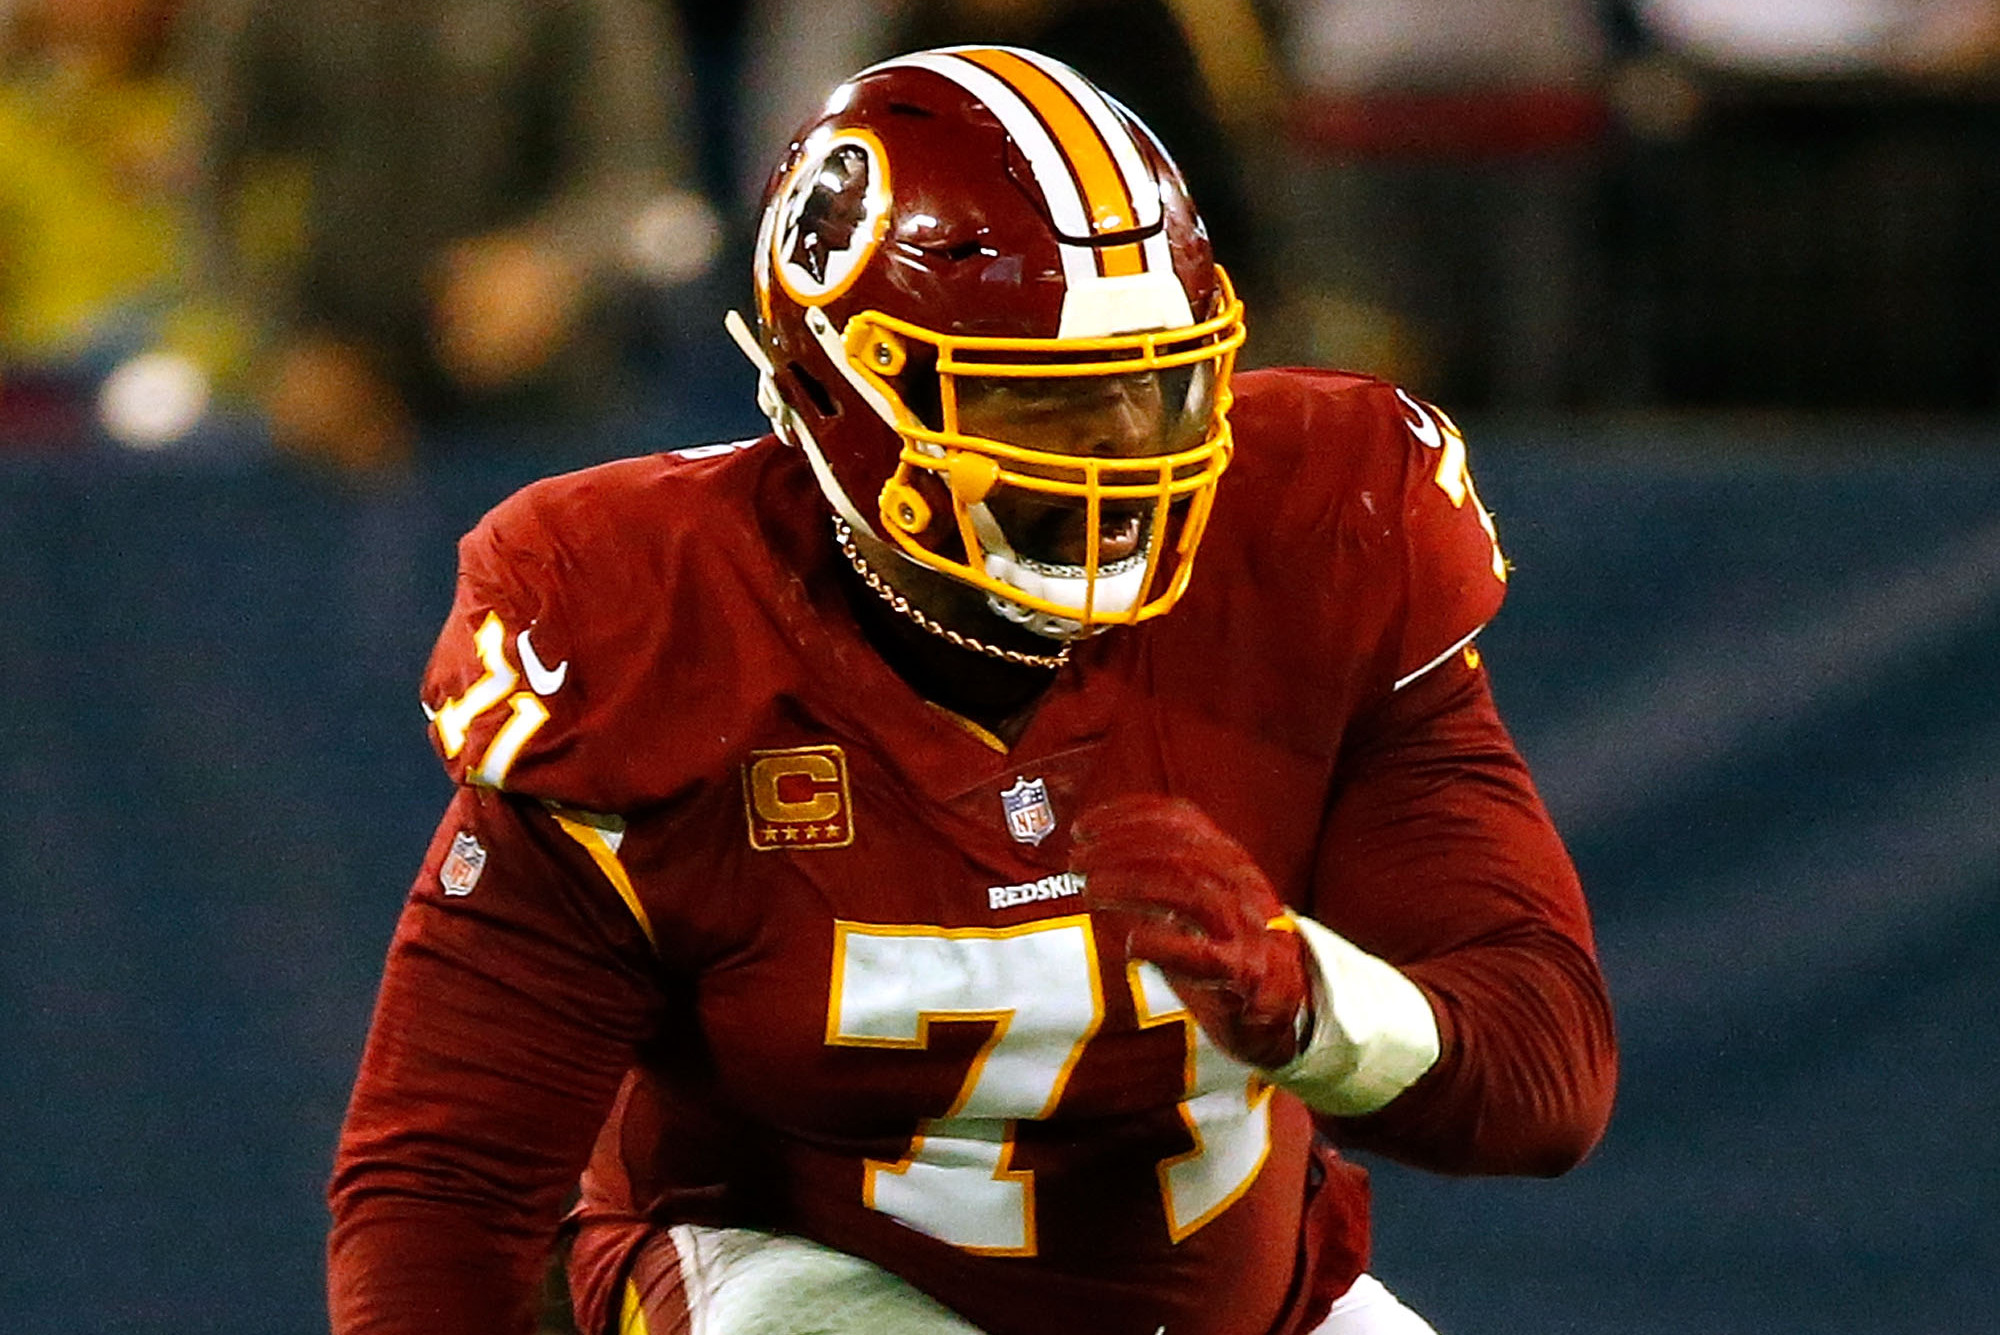 Trent Williams Traded to 49ers from Redskins for 2020, 2021 NFL Draft Picks